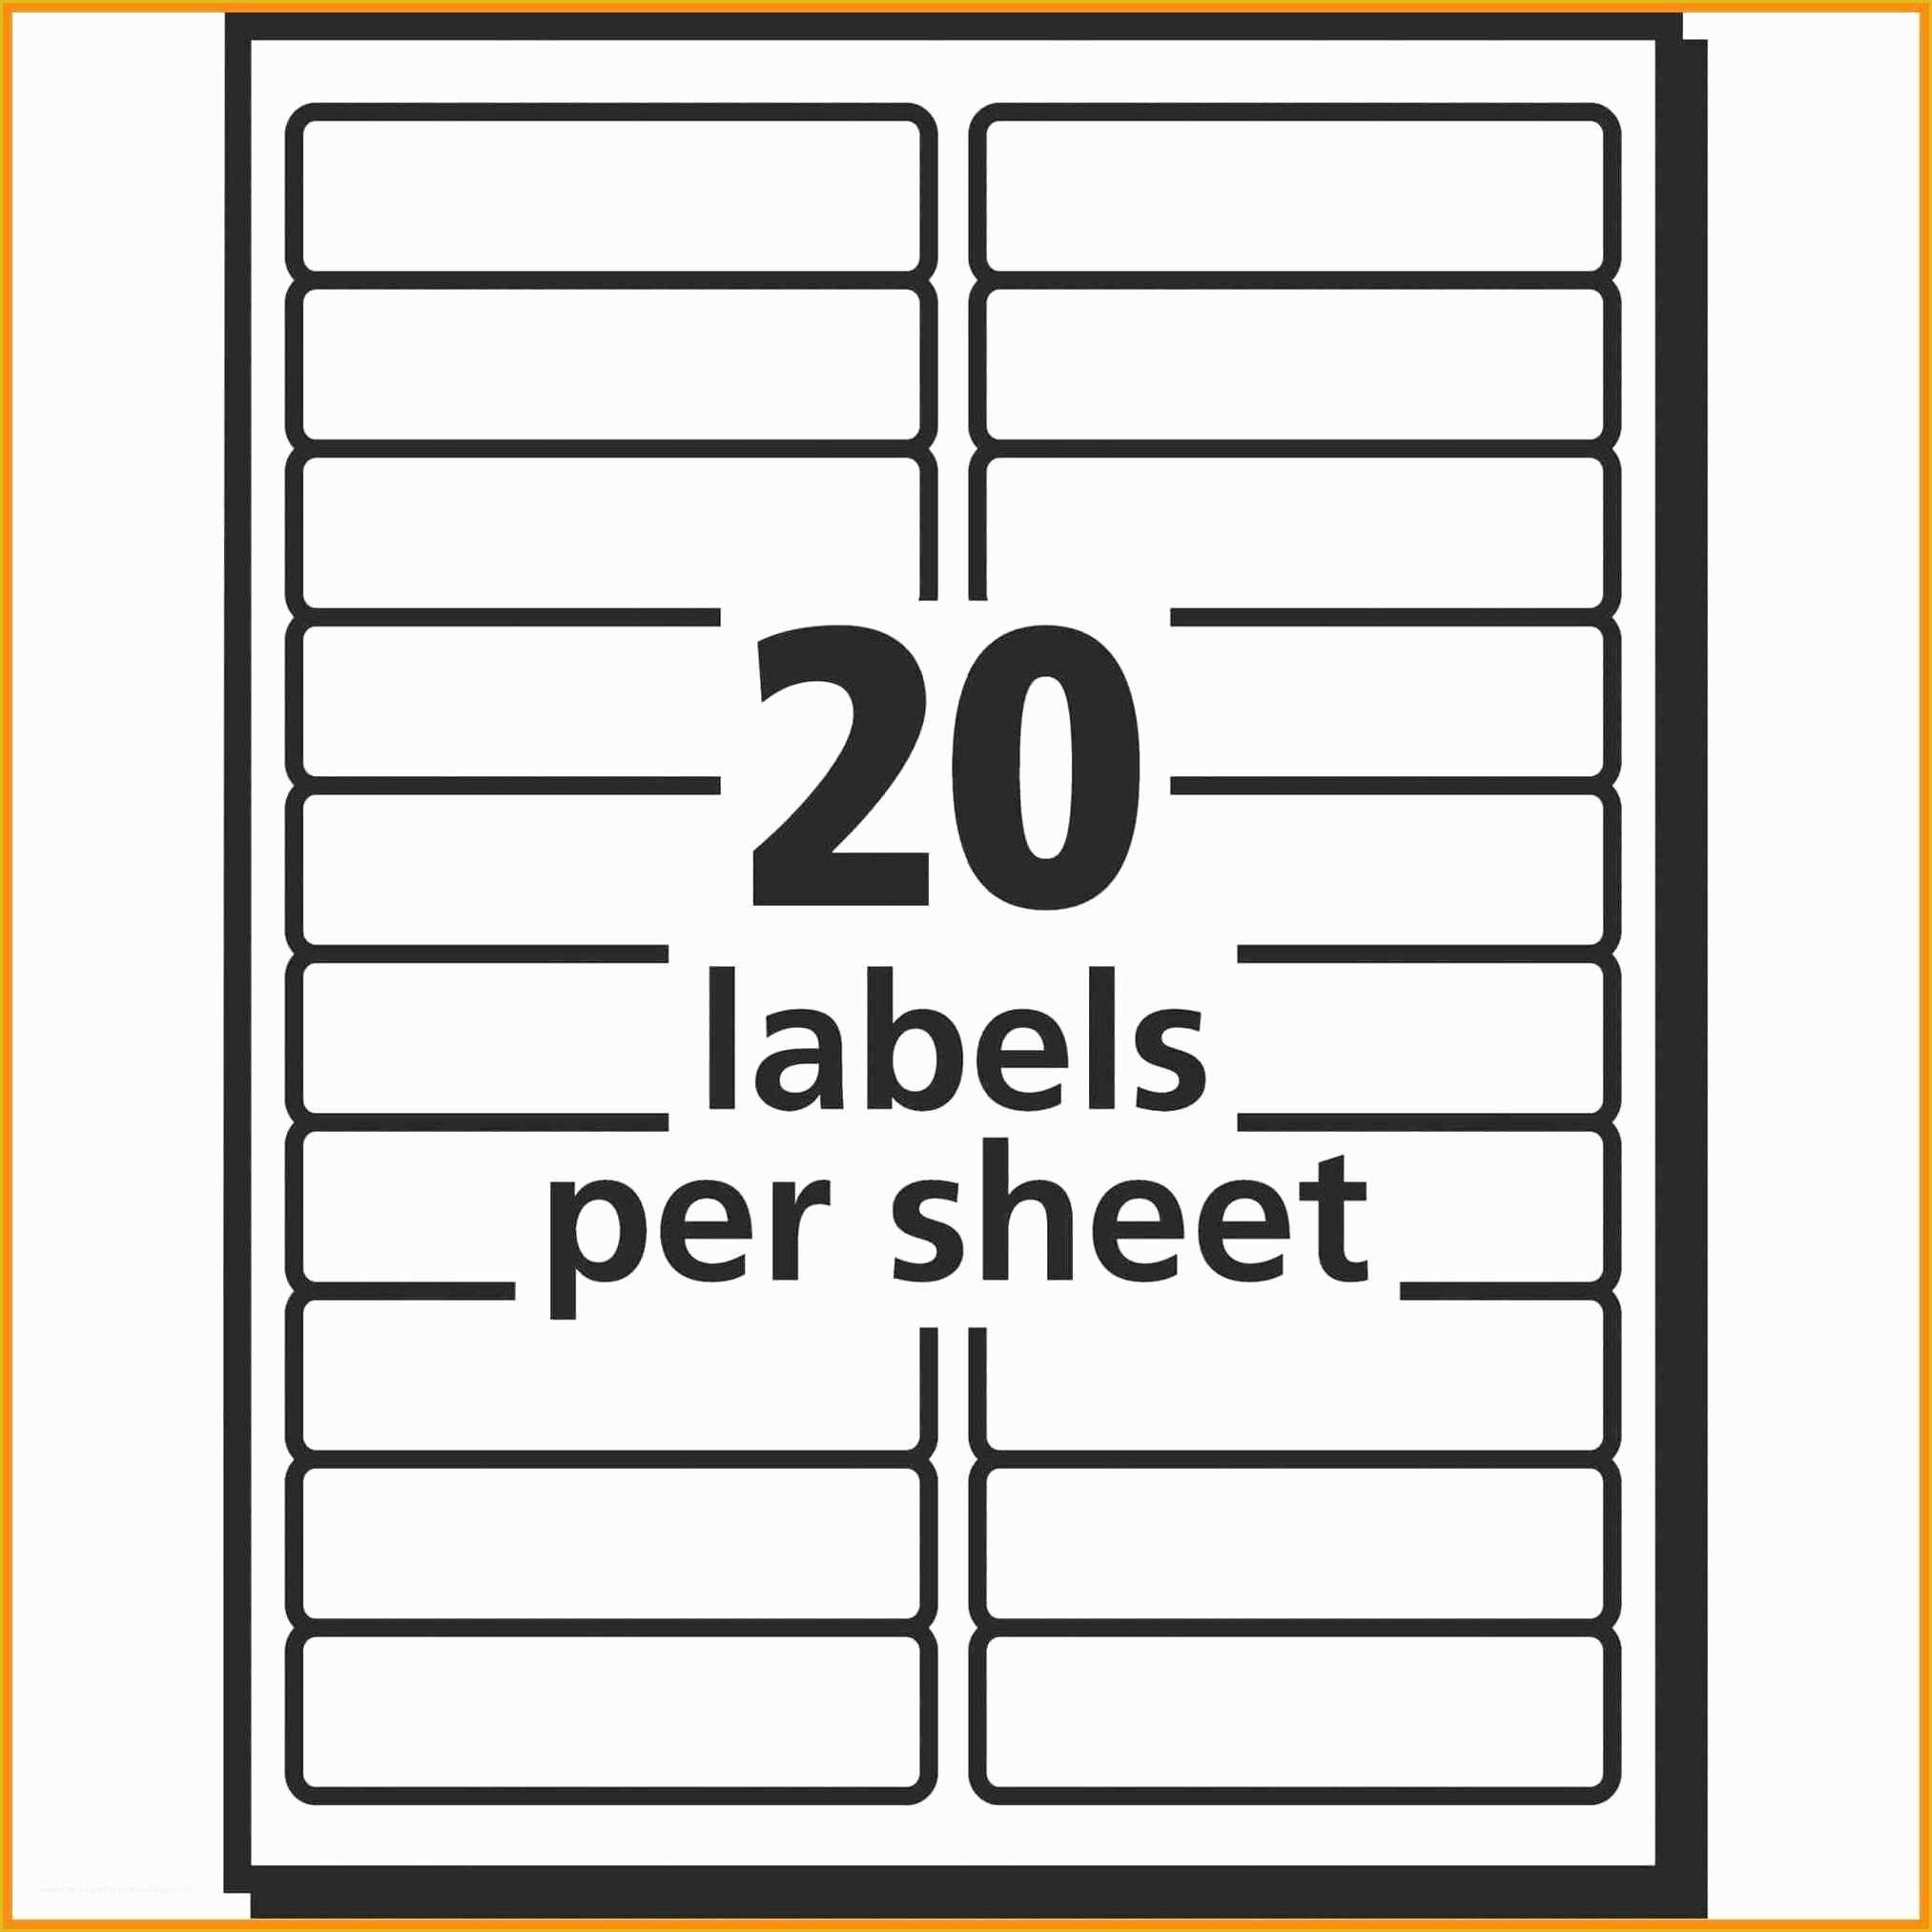 Free Template For Avery 5366 File Folder Labels Of What You Know About 